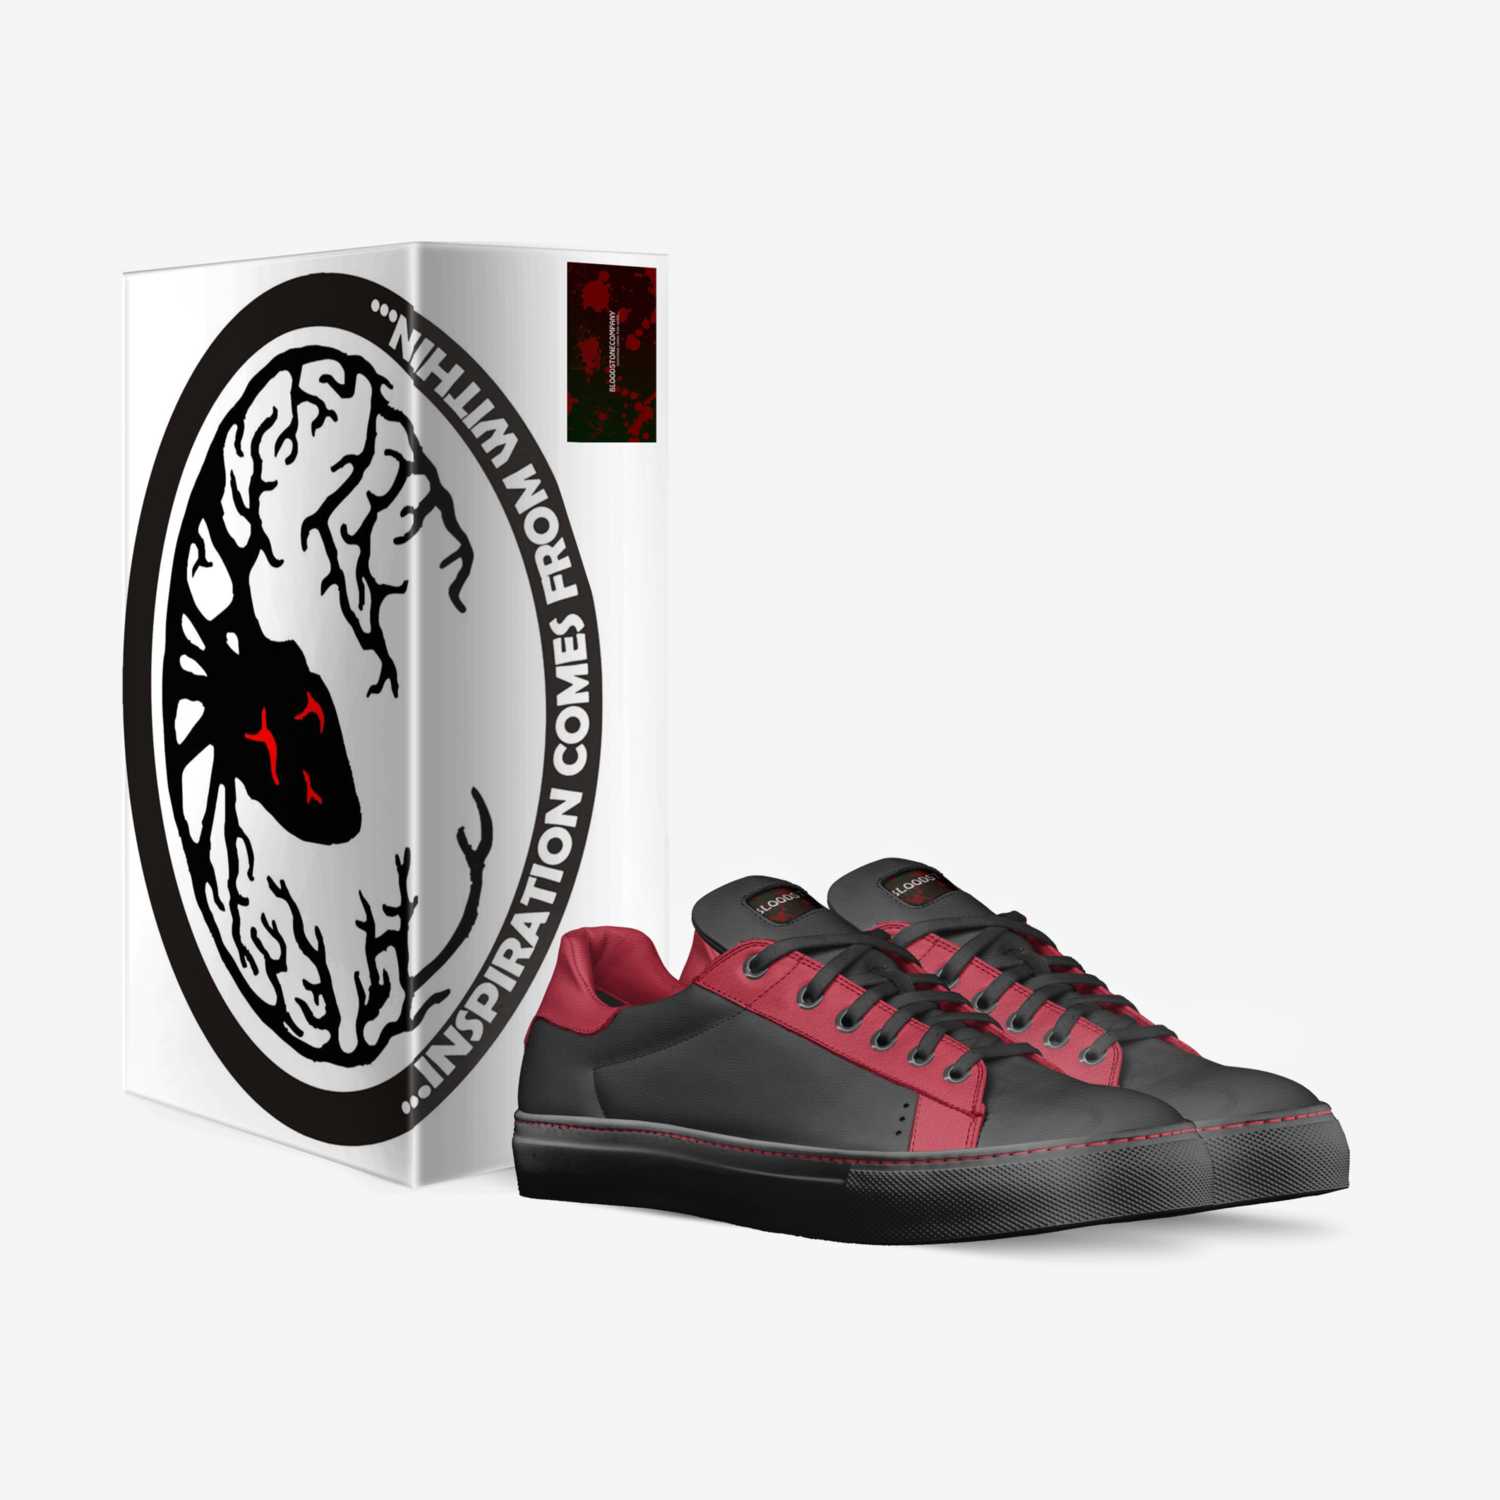 Bloodstone custom made in Italy shoes by Darksapphire | Box view